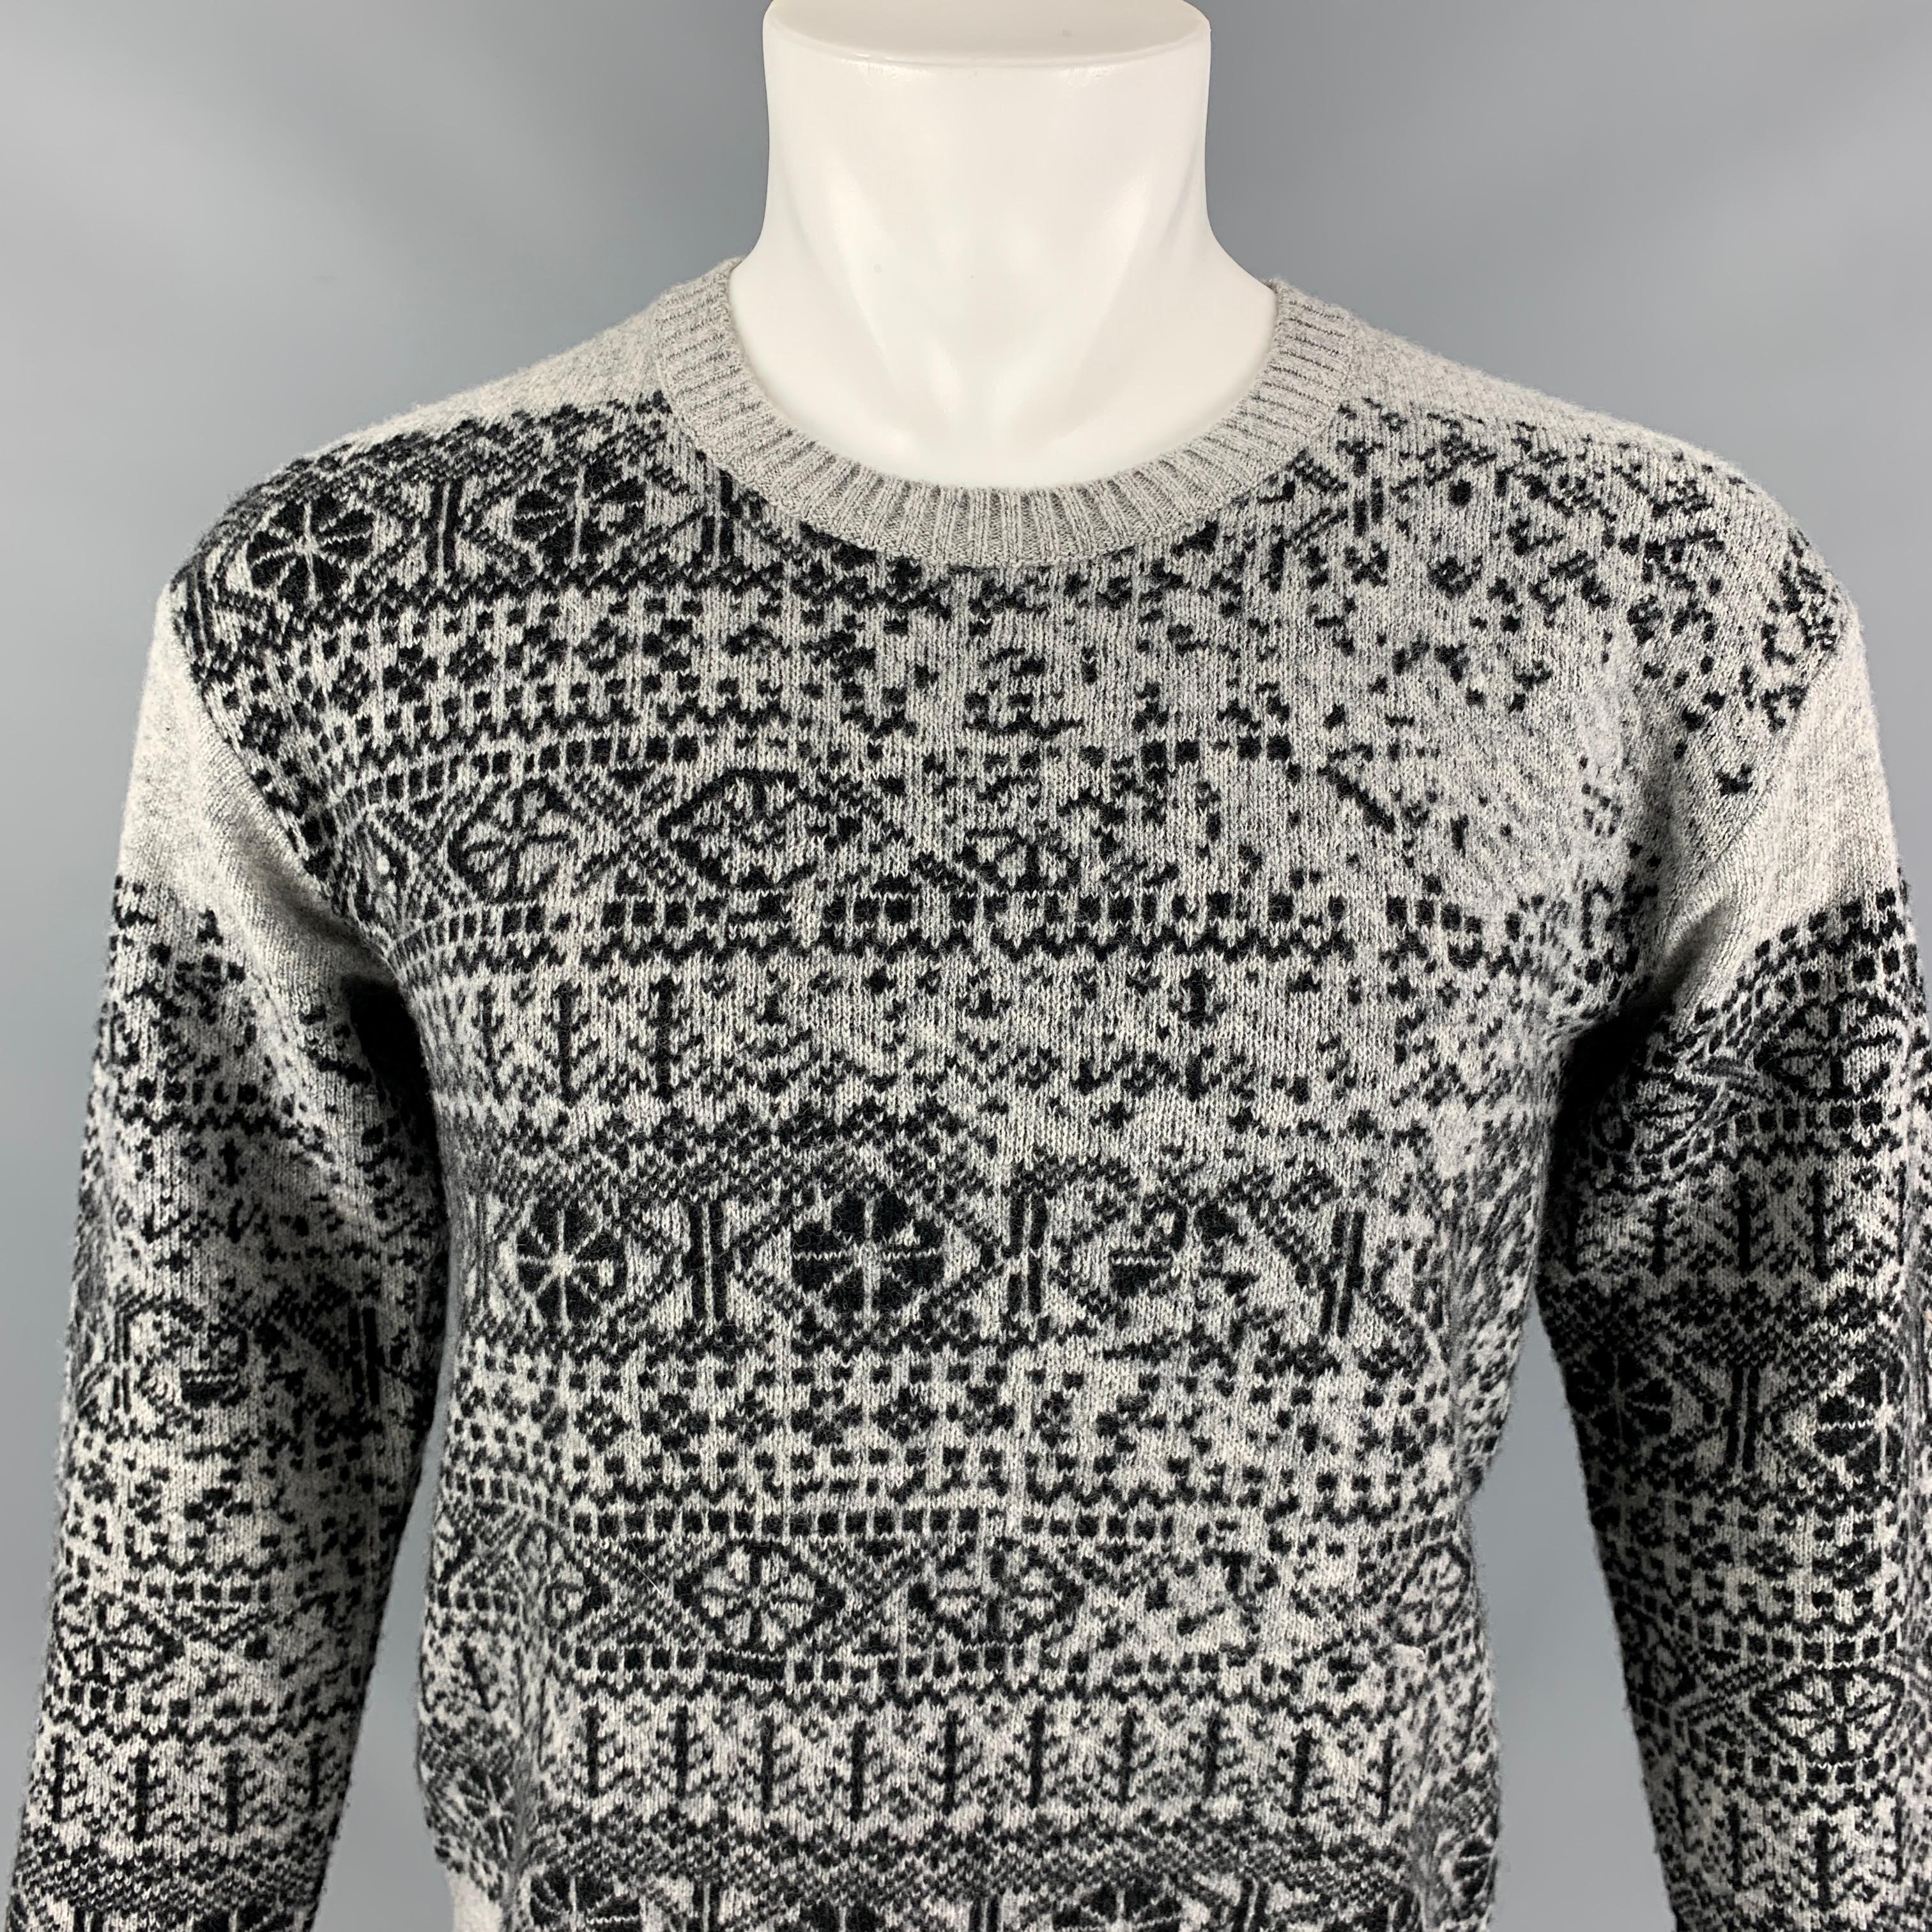 Vintage BURBERRY PRORSUM pullover sweater comes in a gray & black fairisle print wool featuring a crew-neck. Made in Italy. 

Very Good Pre-Owned Condition.
Marked: S

Measurements:

Shoulder: 20 in.
Chest: 40 in.
Sleeve: 26.5 in.
Length: 26 in